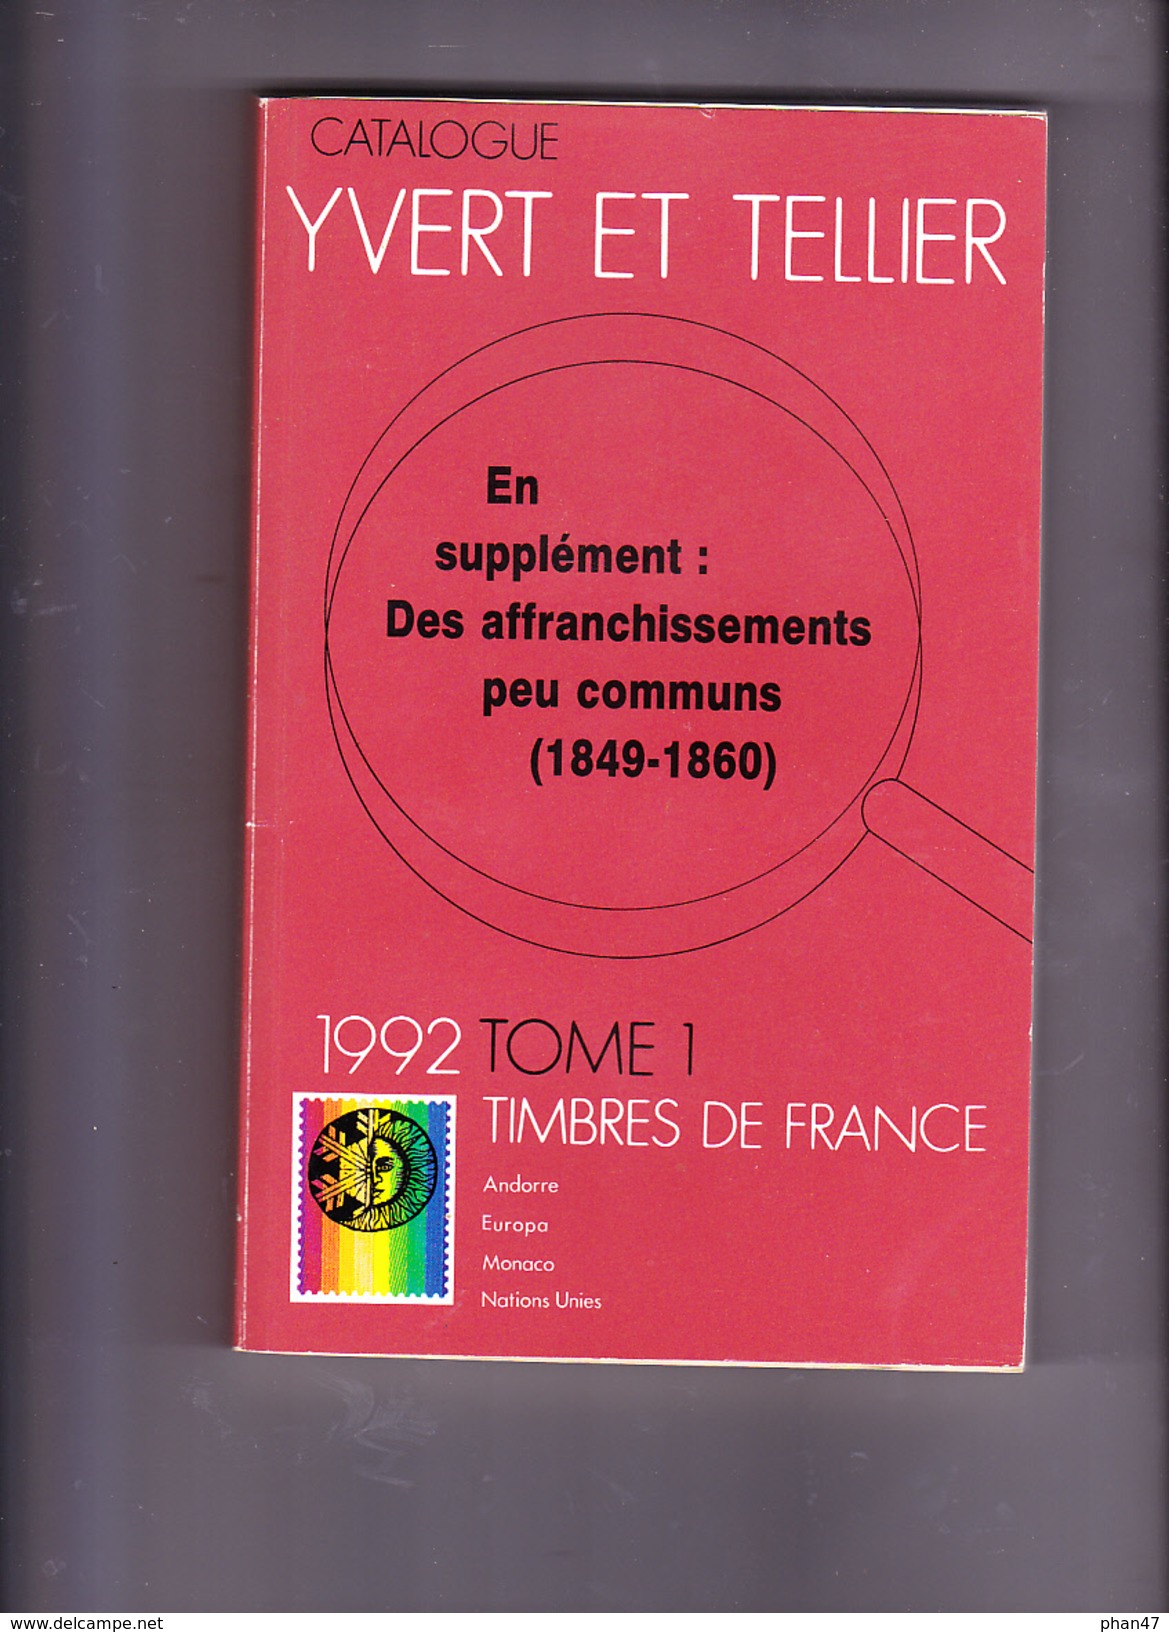 CATALOGUE DE TIMBRES-POSTE YVERT & TELLIER, 1992, Tome I, France, Andorre, Europa, Monaco, Nations Unies 490 Pages - Frankreich